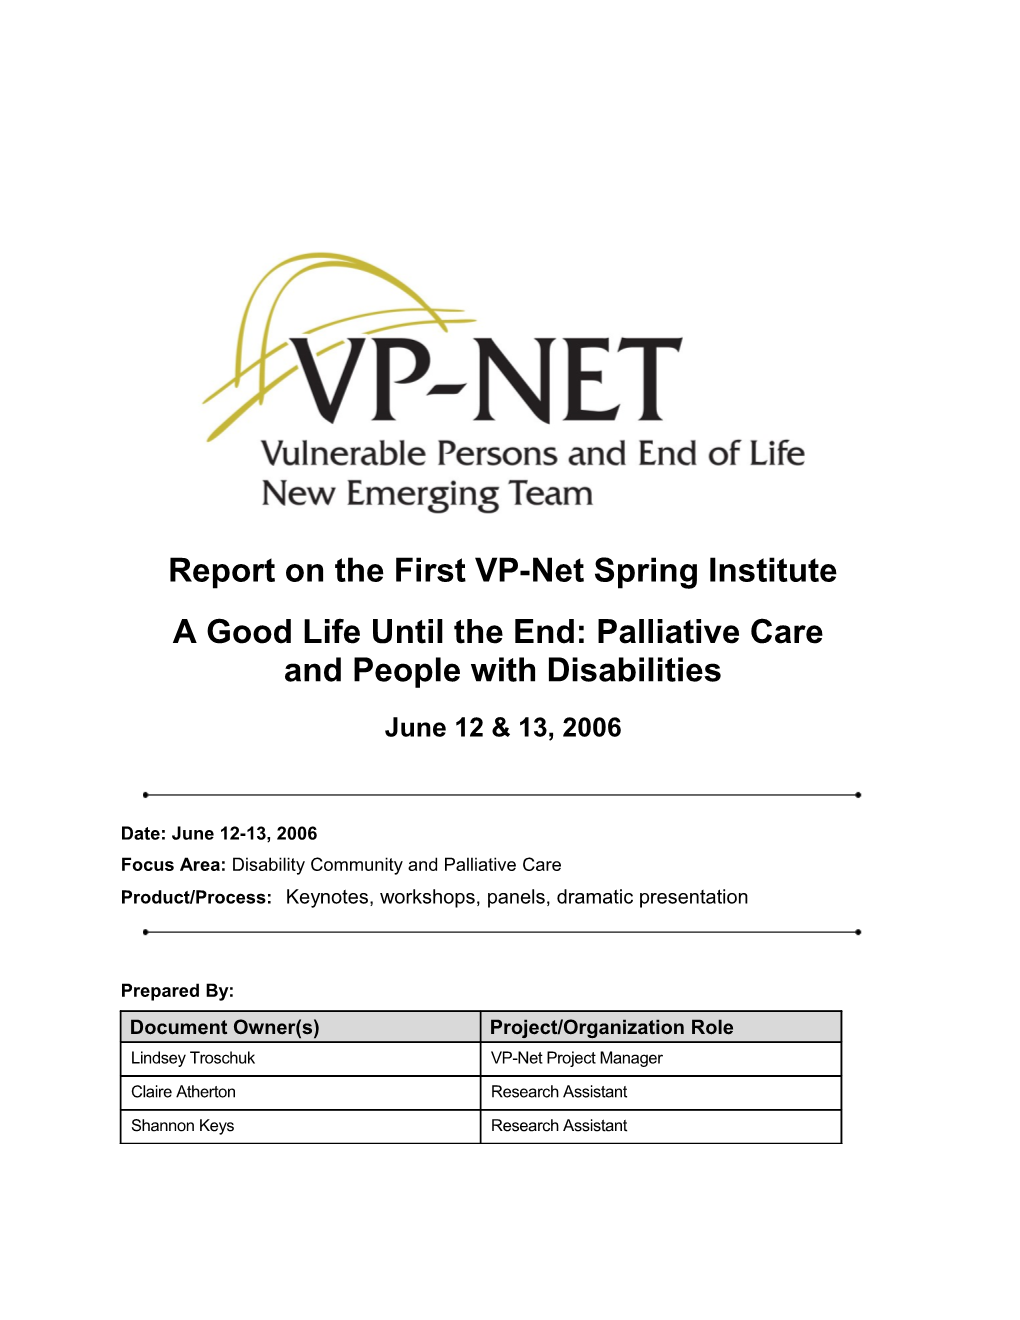 Report on the First VP-Net Spring Institute